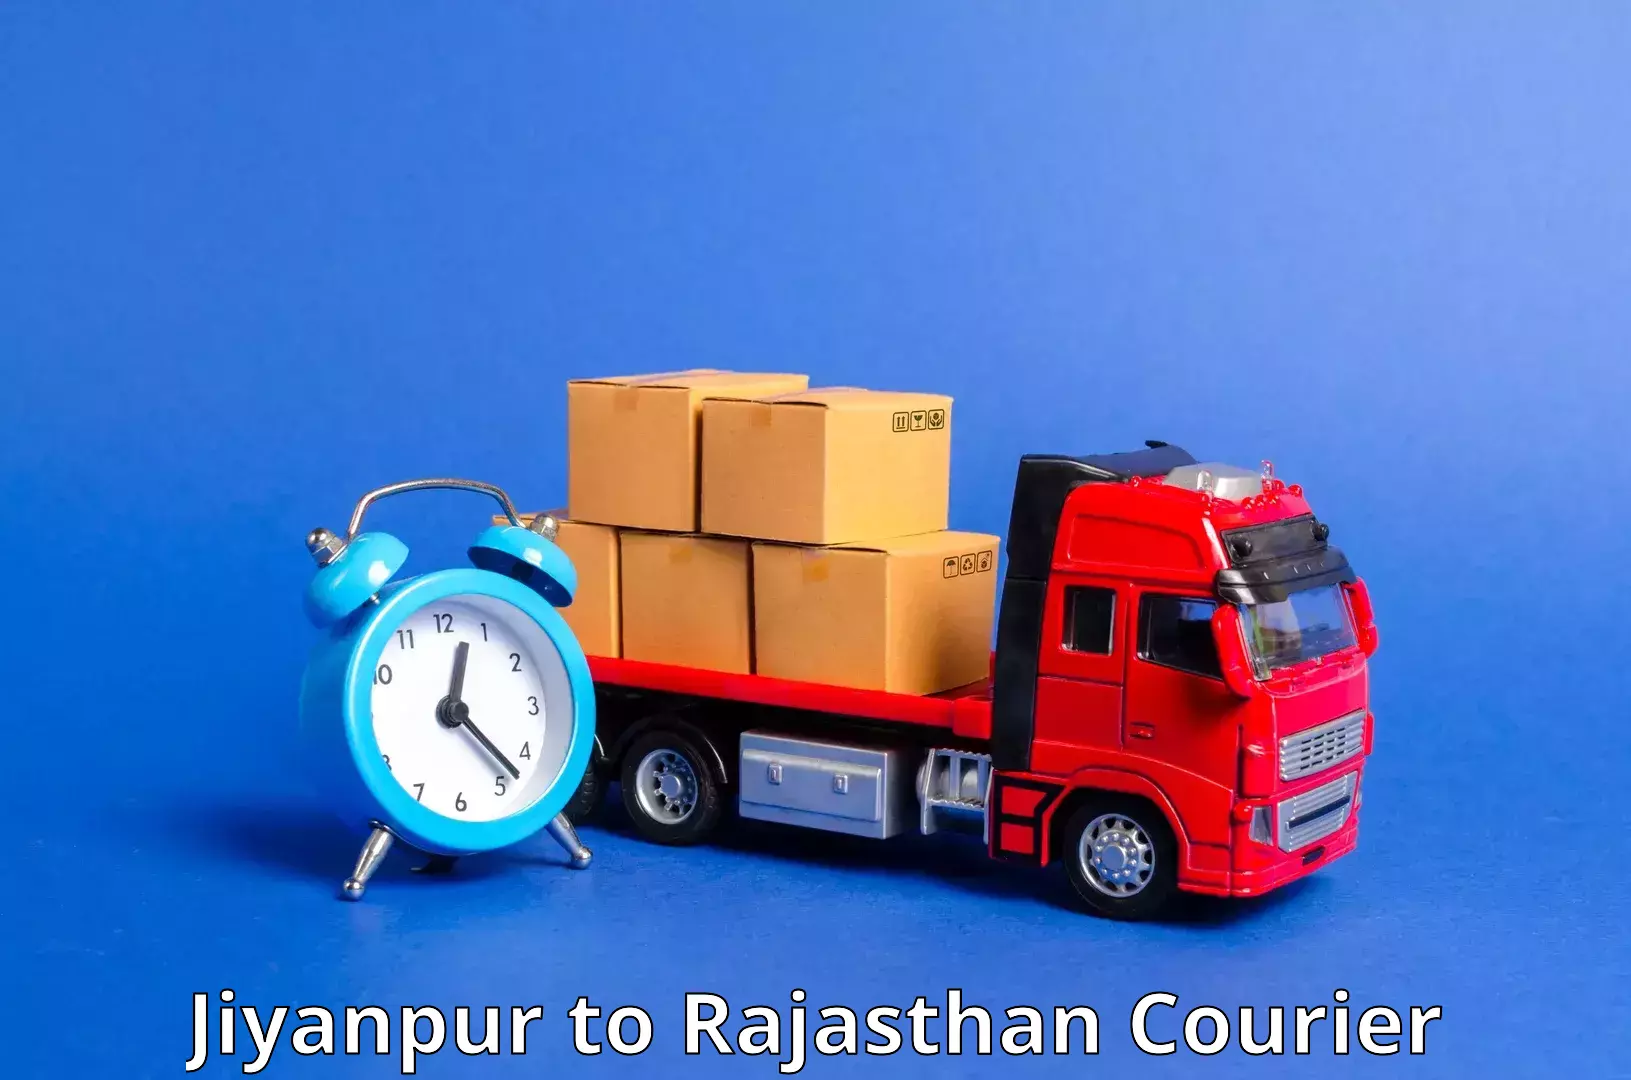 Parcel service for businesses Jiyanpur to Fatehpur Sikar